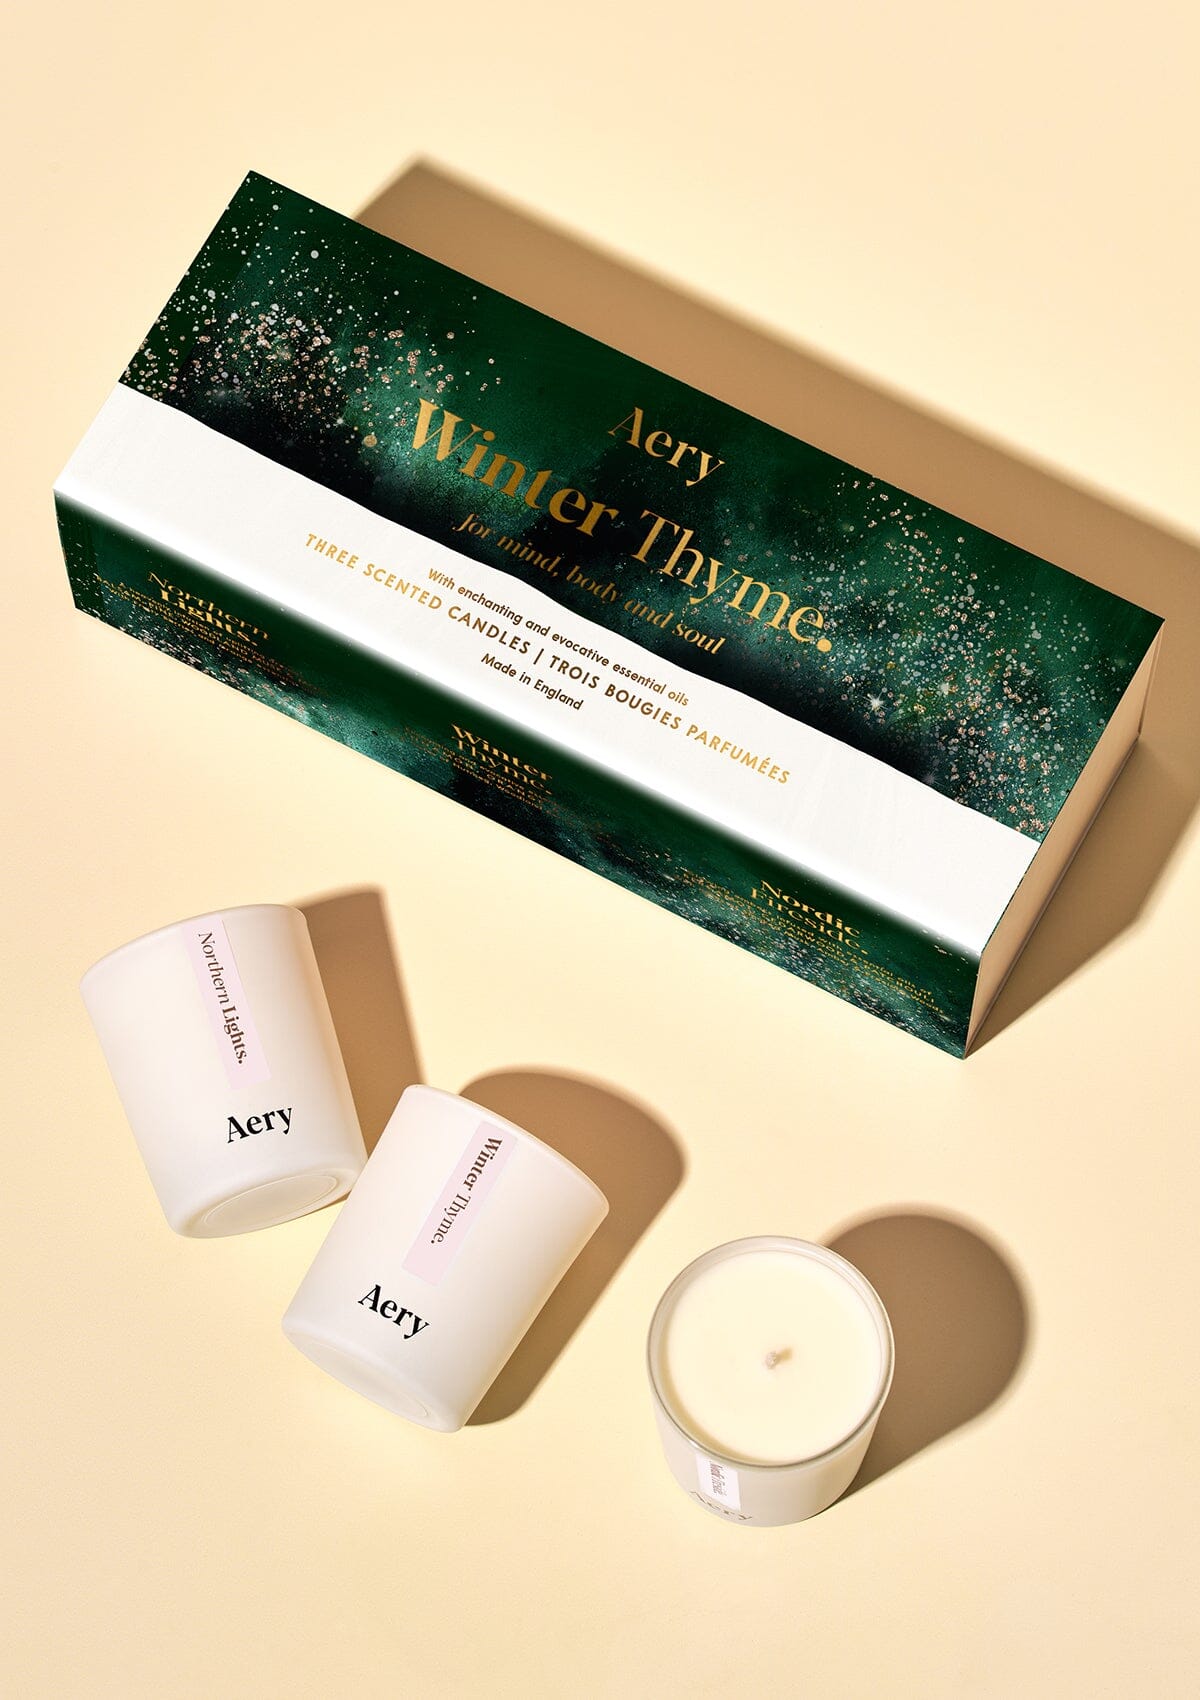 Winter Thyme Gift Set of Three - Votive Candles